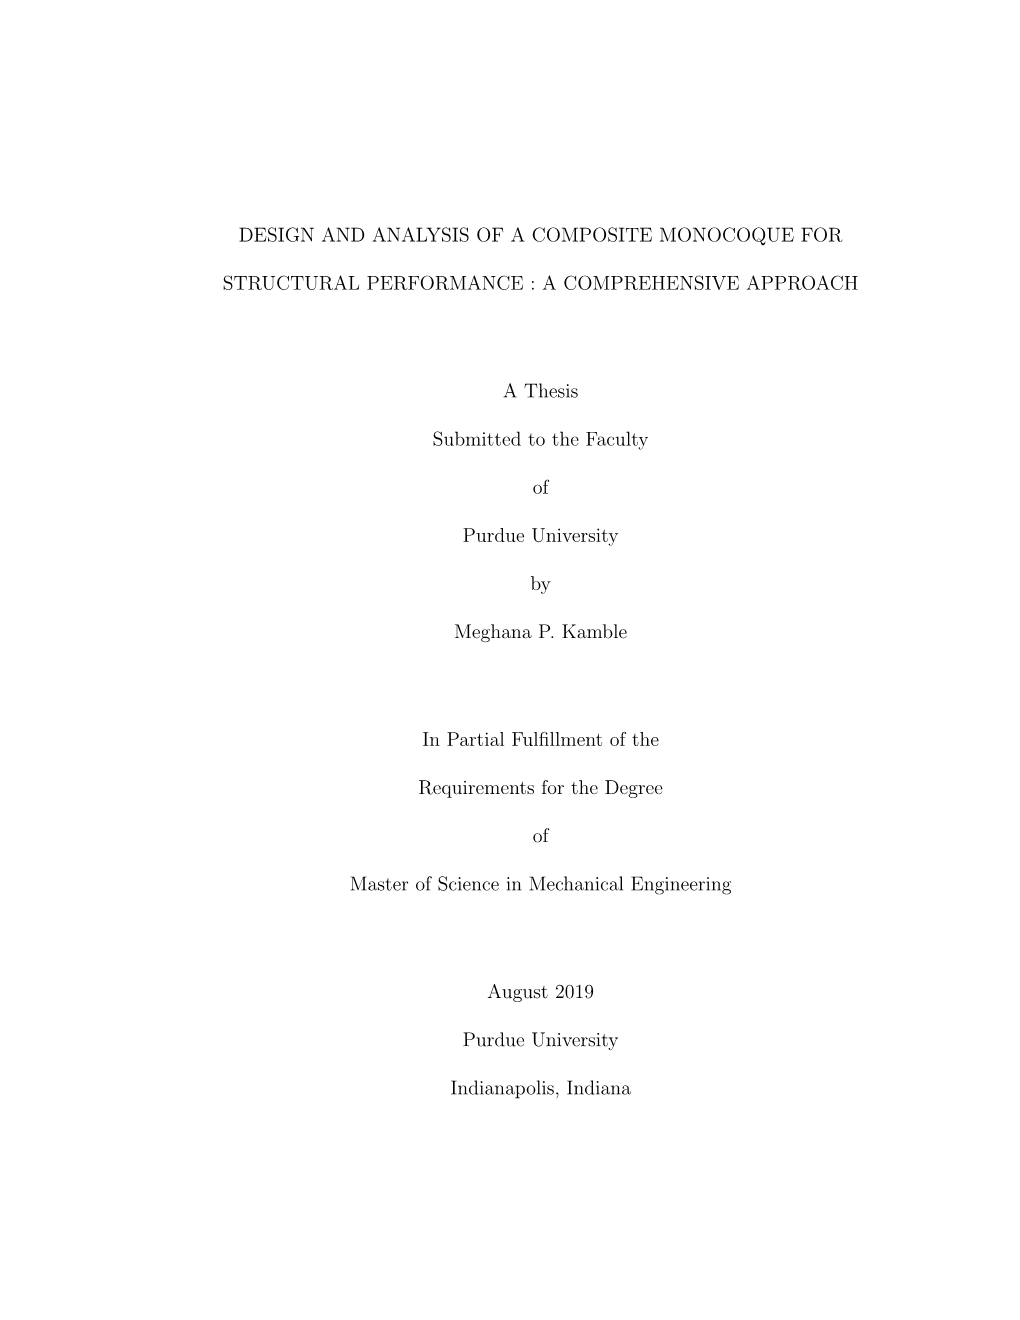 DESIGN and ANALYSIS of a COMPOSITE MONOCOQUE for STRUCTURAL PERFORMANCE : a COMPREHENSIVE APPROACH a Thesis Submitted to The